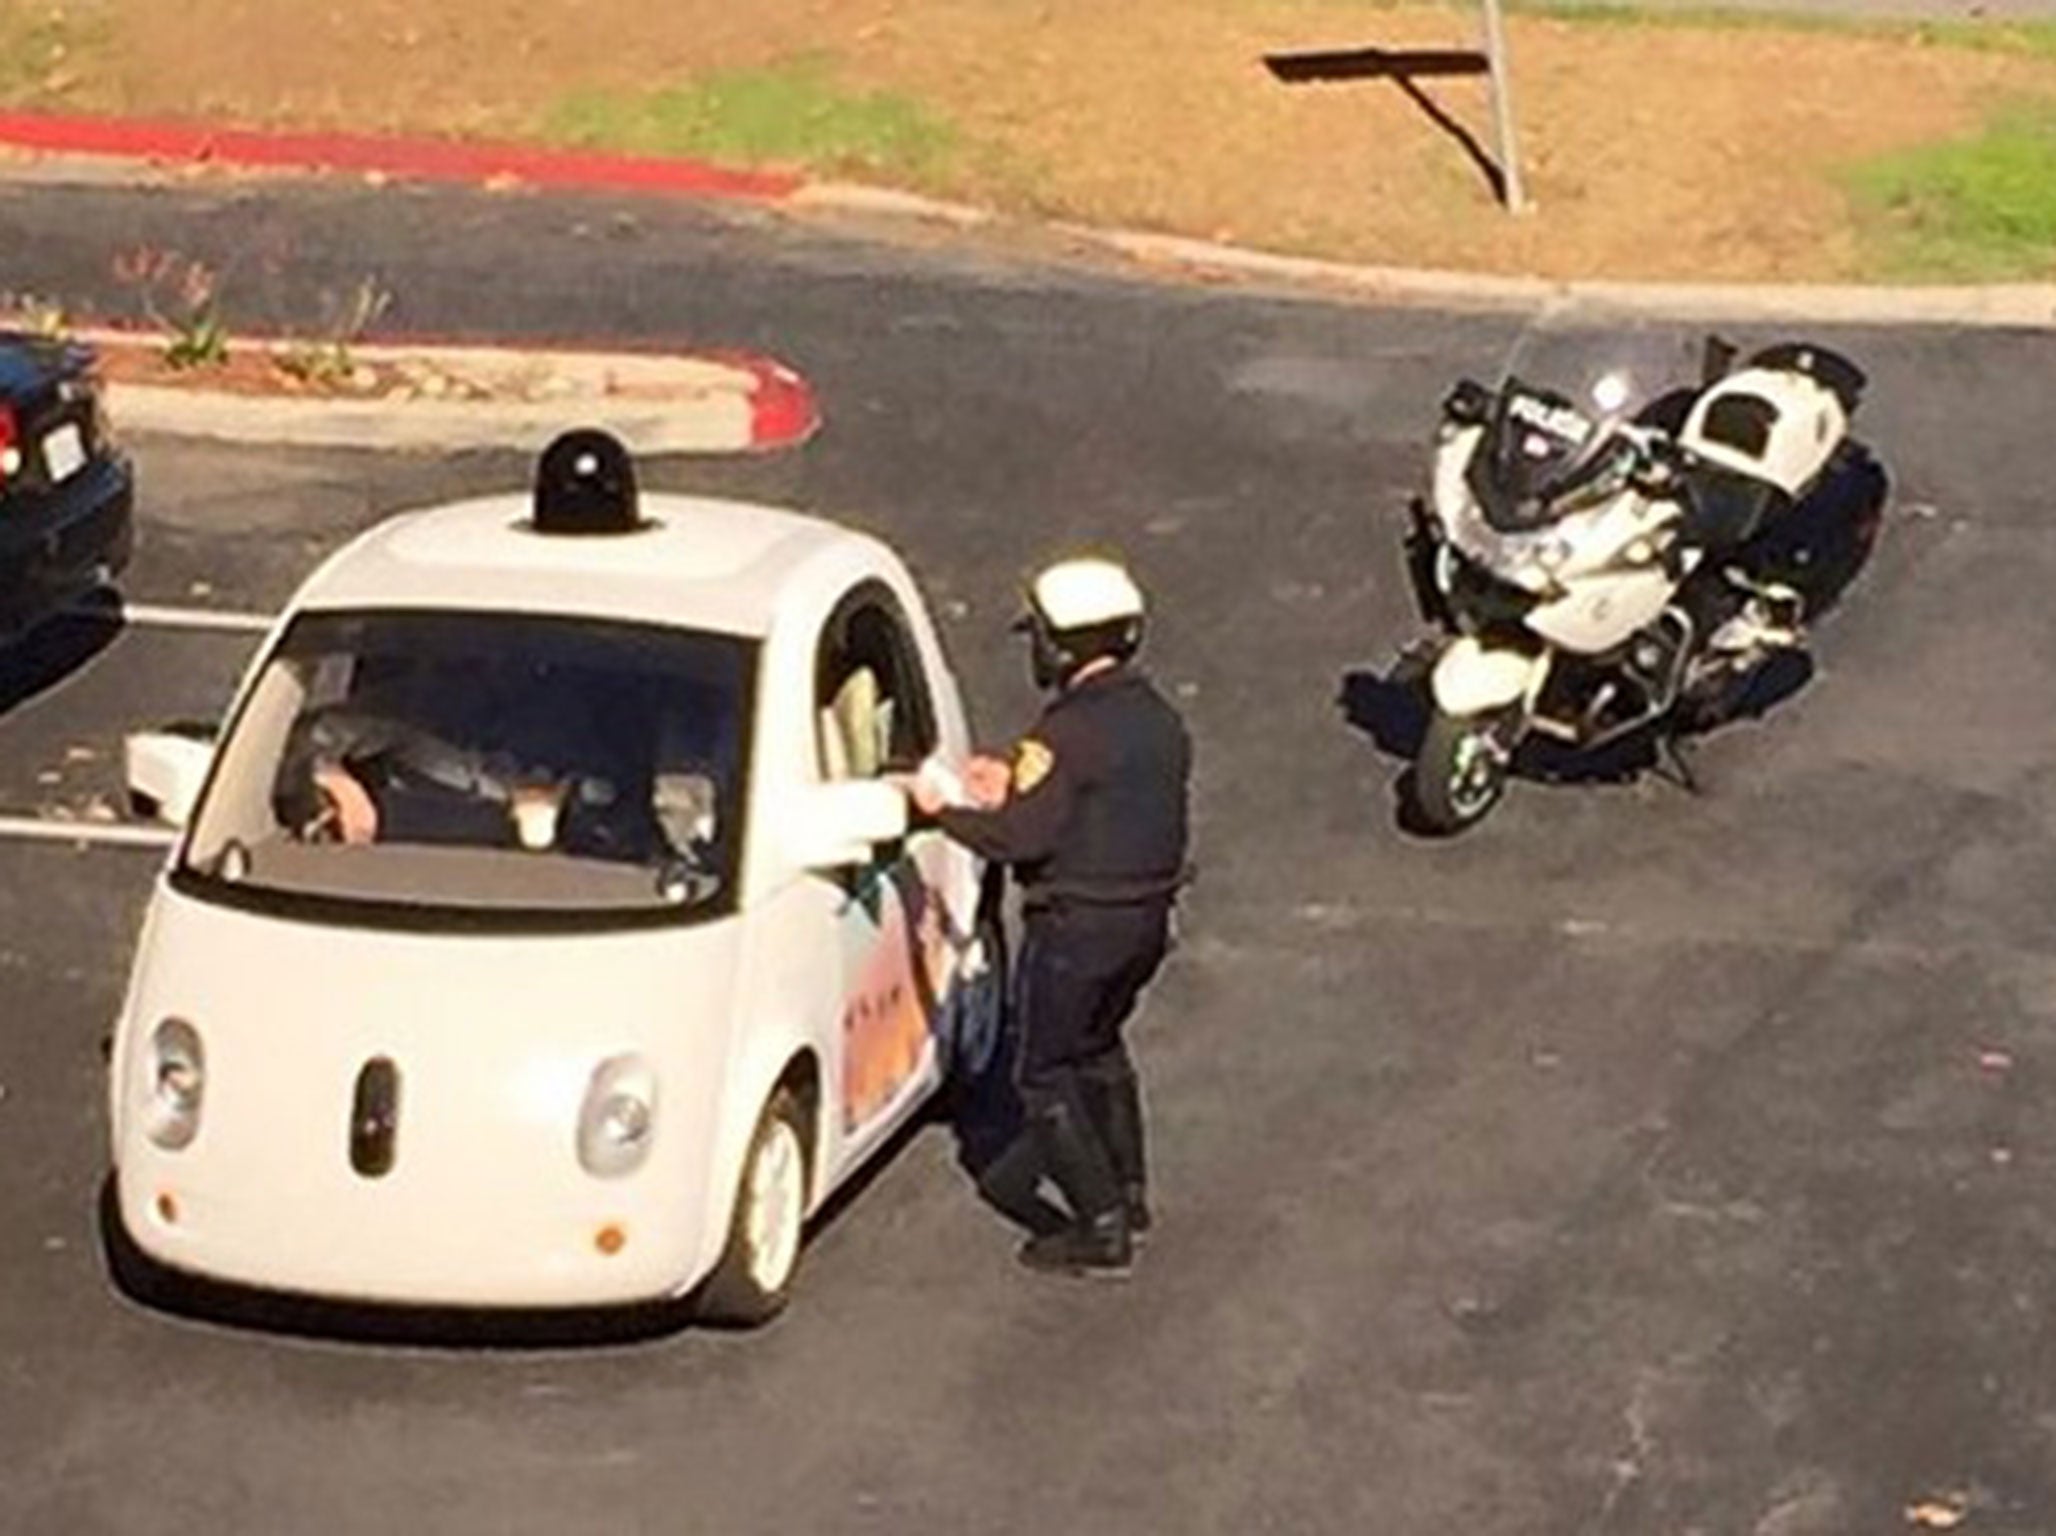 A police officer chats to the self-driving cars (human) back-up driver